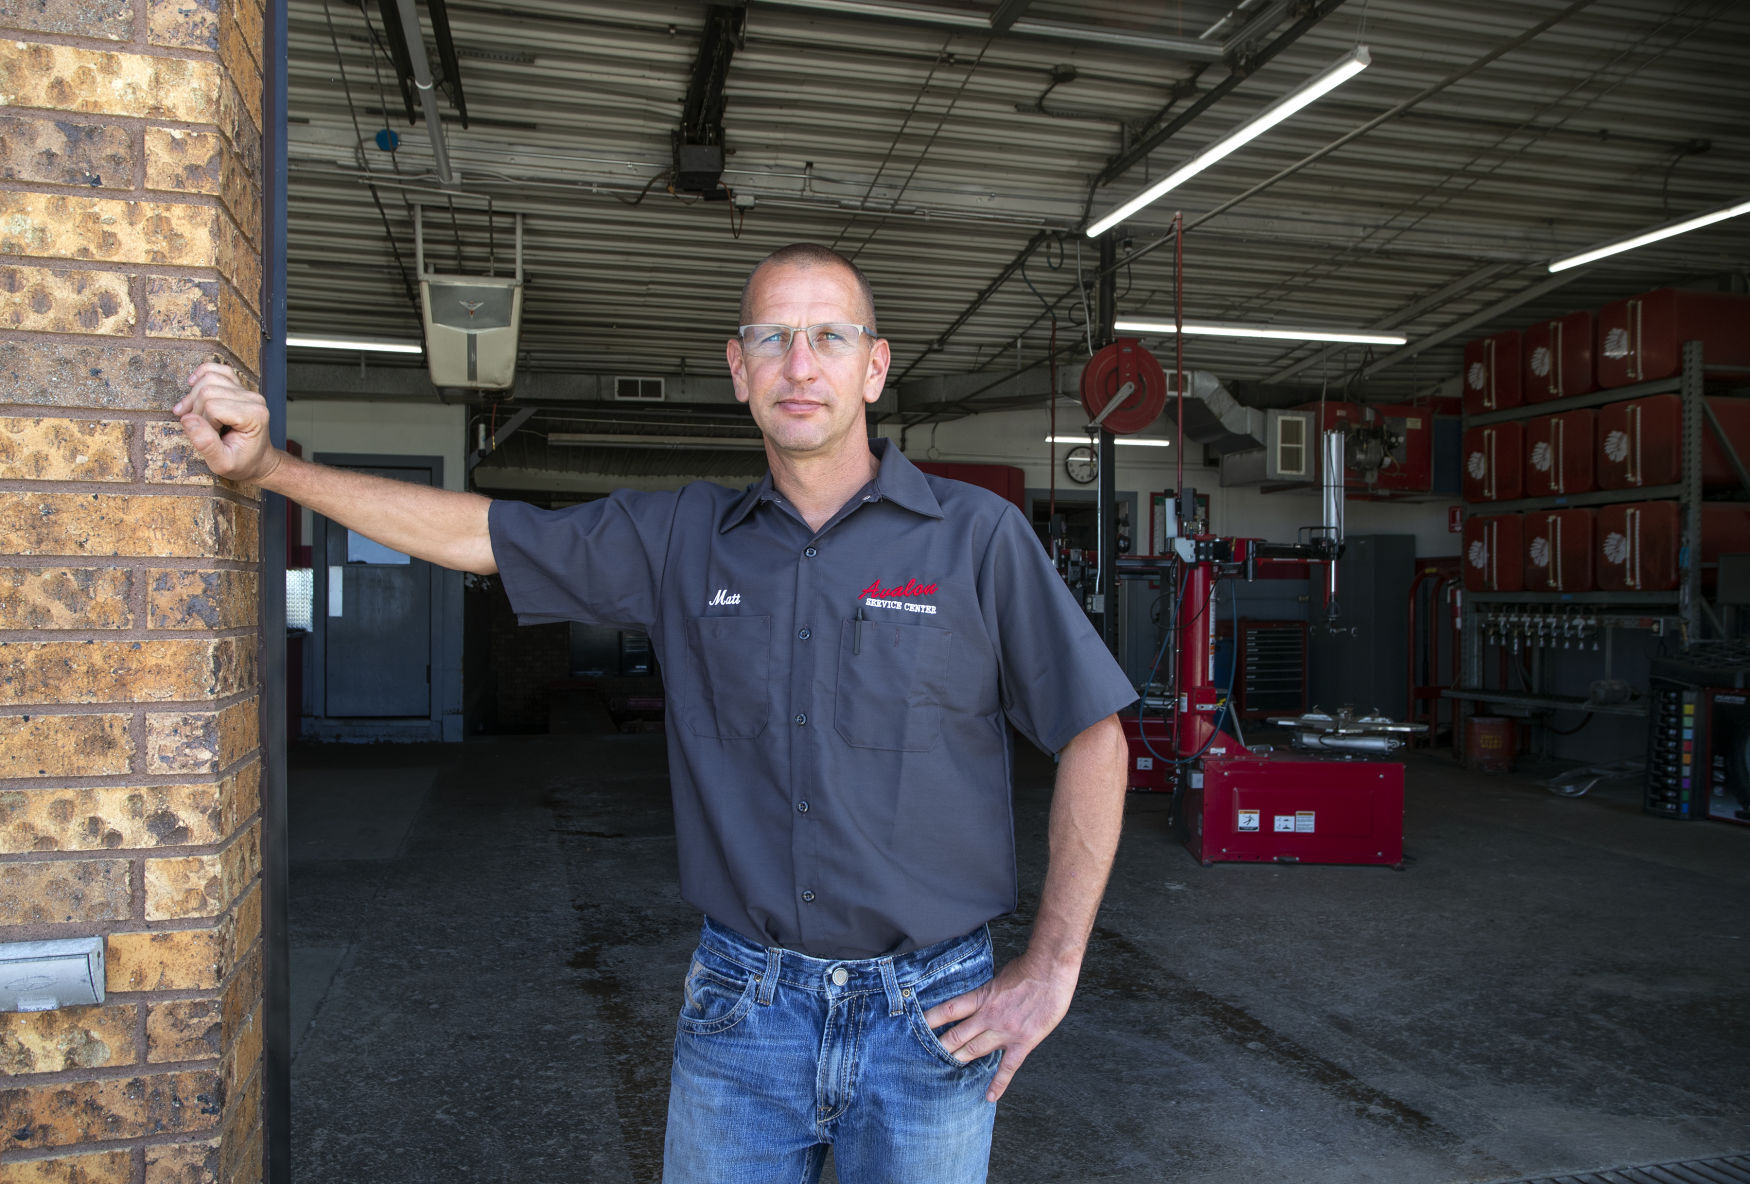 Co-owner Matt Leibfried in front of one of the work bays at Avalon Service Center in Rickardsville, Iowa on Friday, August 5, 2022.    PHOTO CREDIT: Stephen Gassman